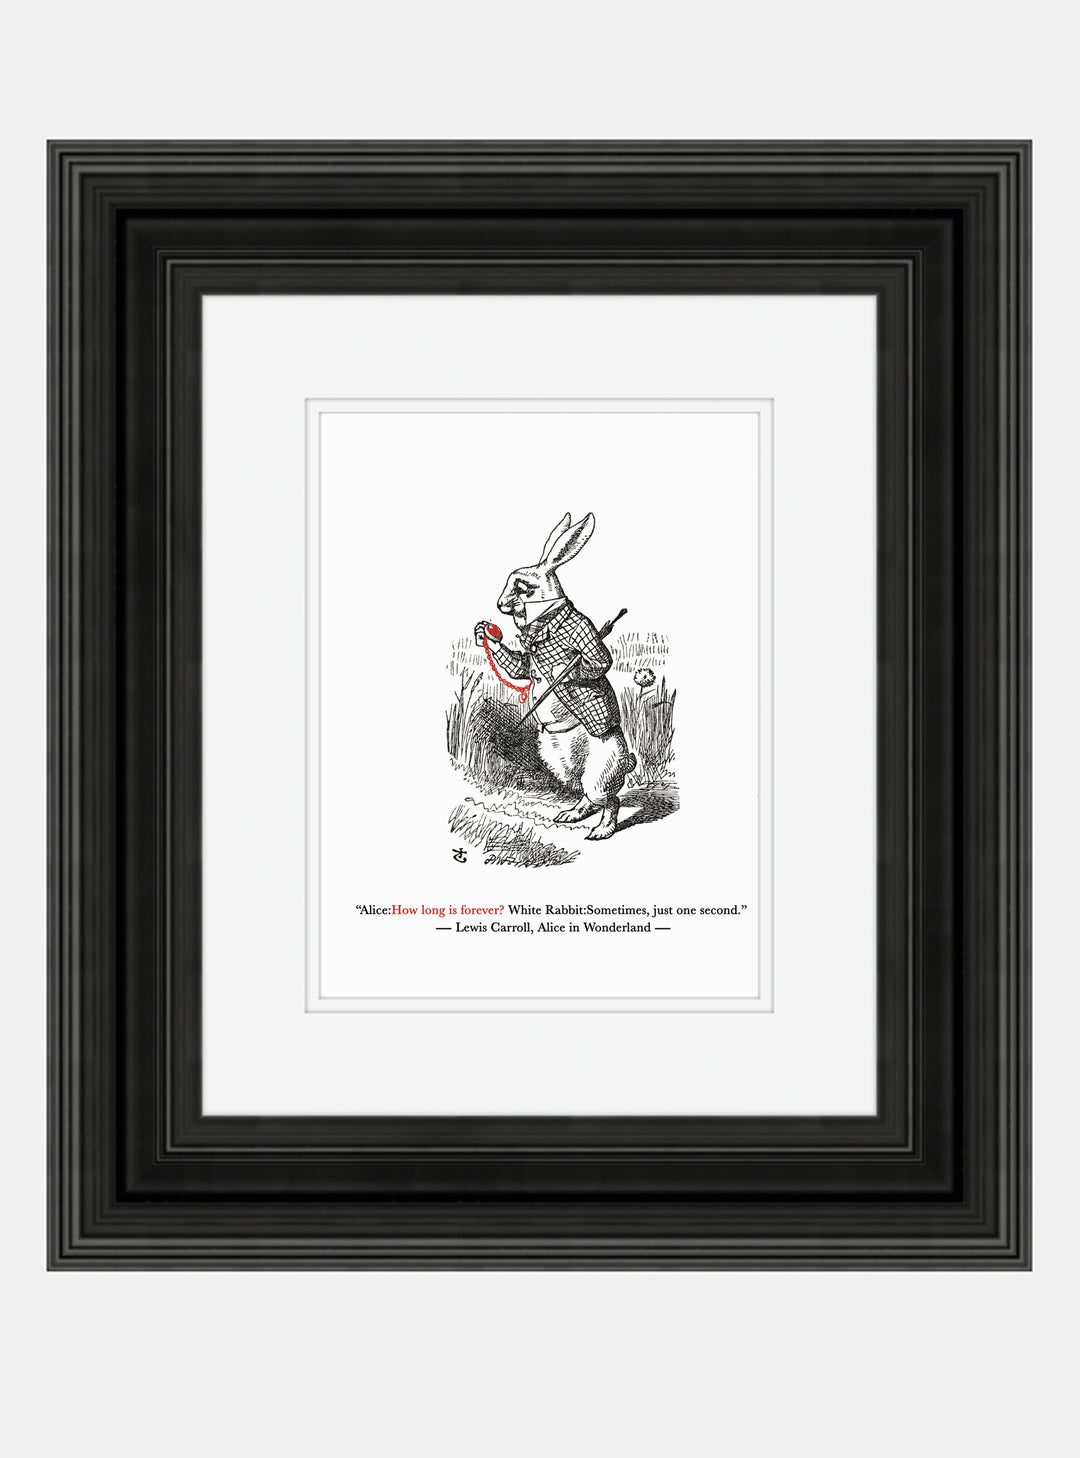 Alice In Wonderland Quote Print - How long is forever?